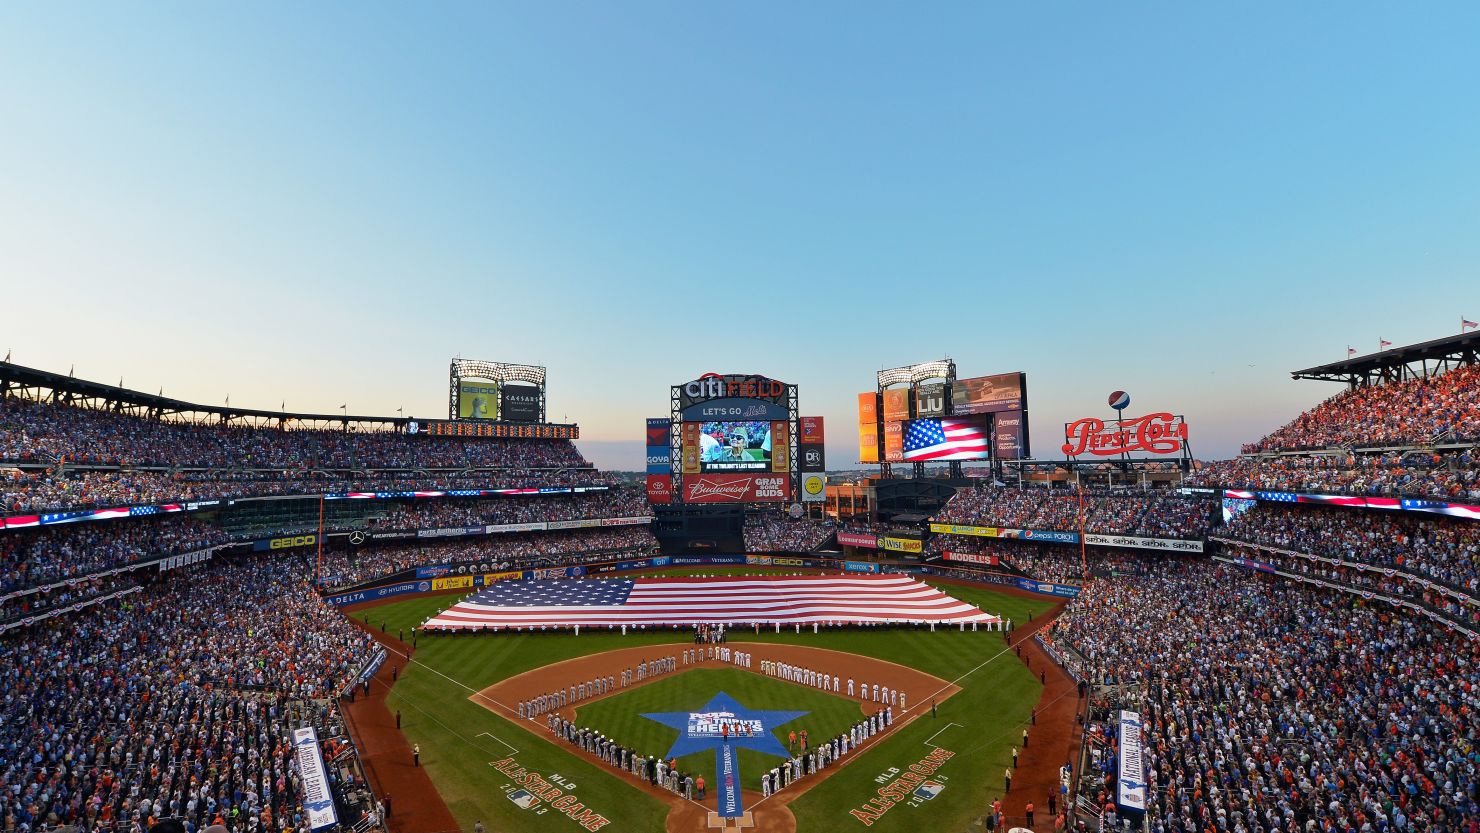 The New York Mets hosted Major League Baseball's All-Star Game at Citi Field in July 2013.